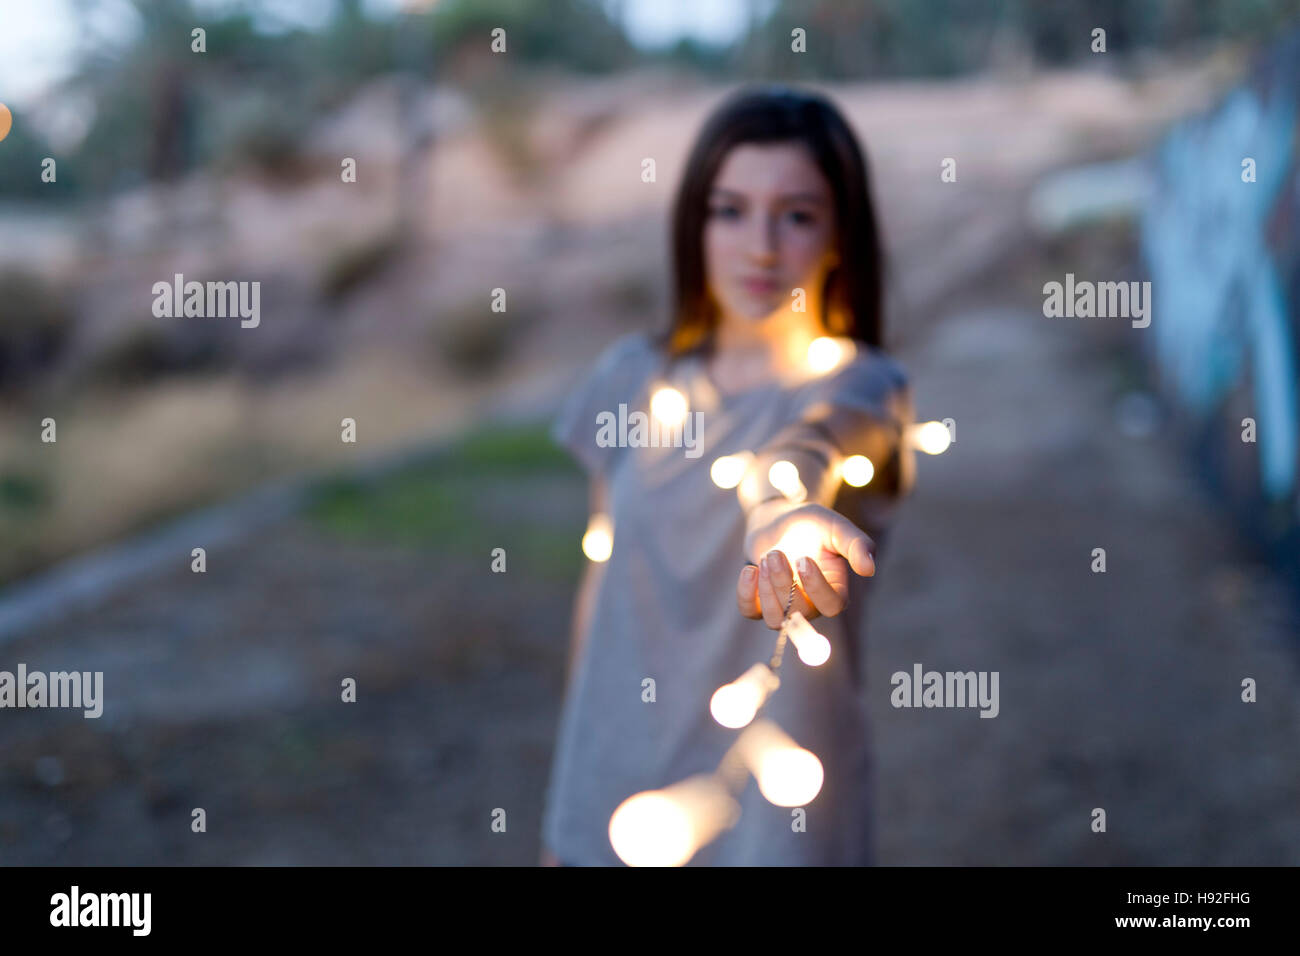 teenager with lights focused hands and face and body is out of focus. Stock Photo